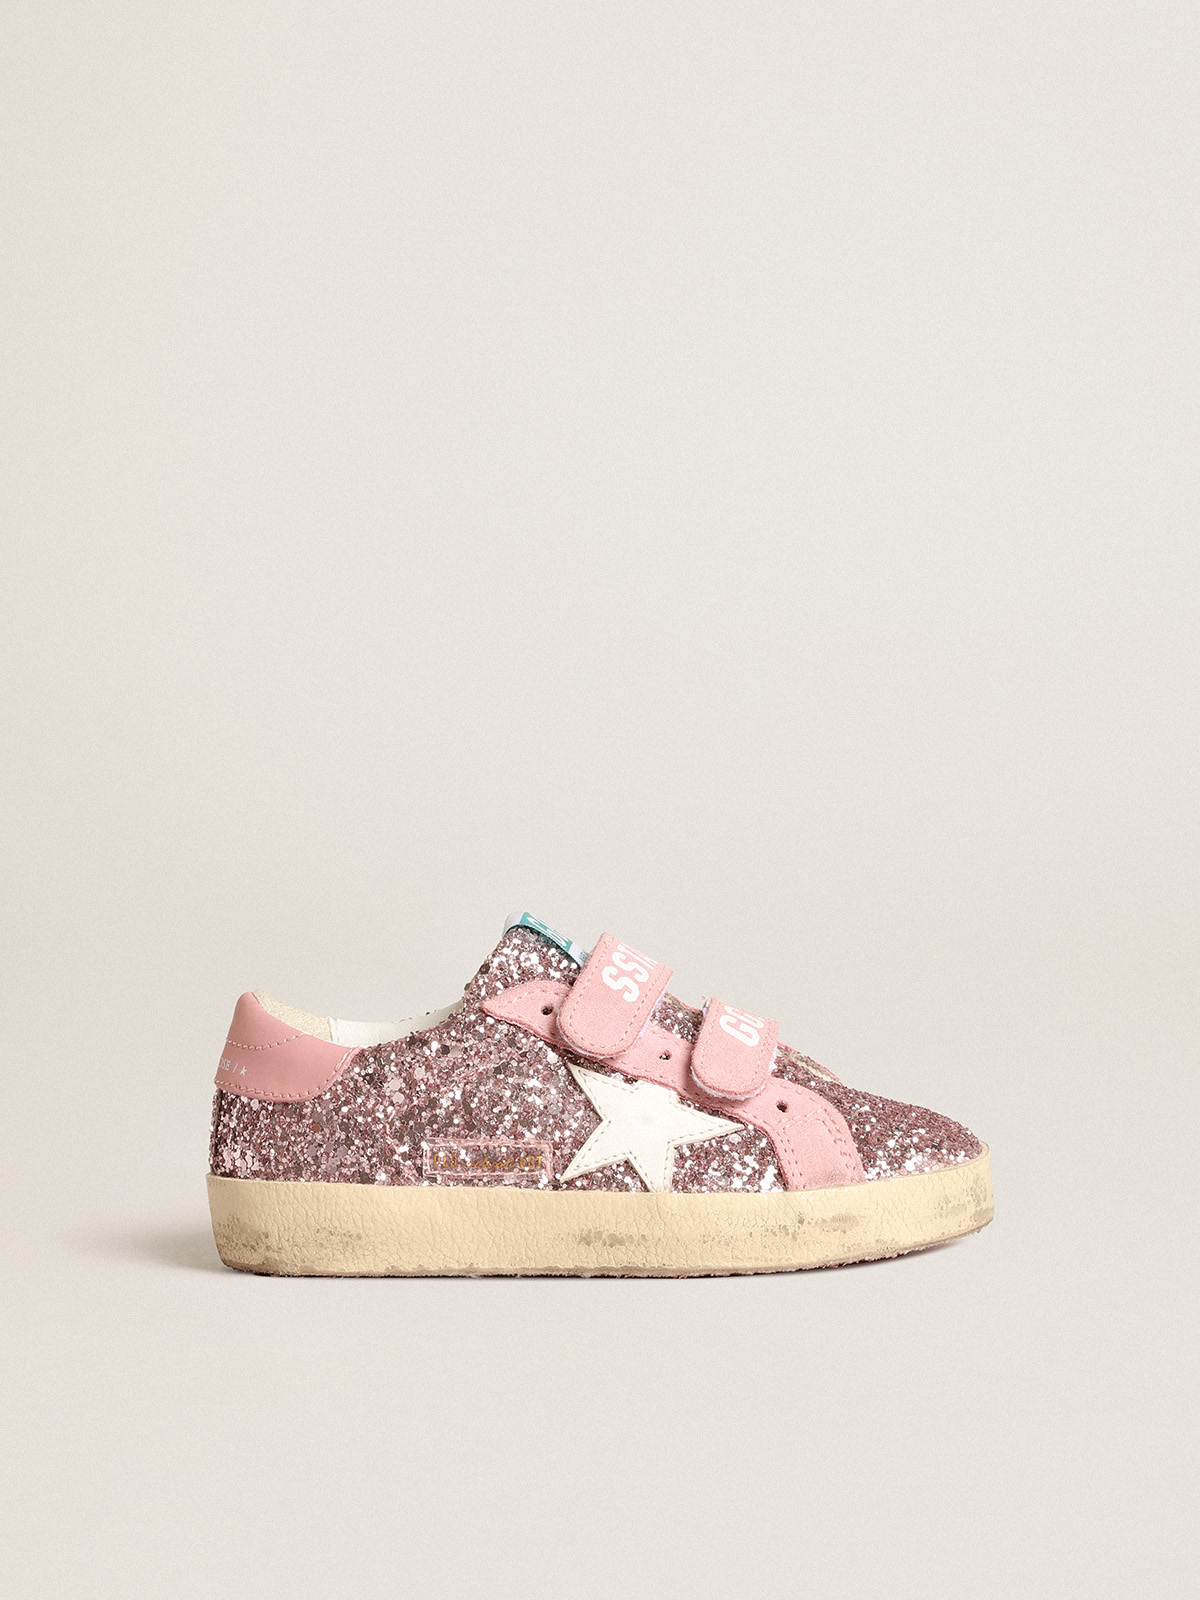 New Arrival LV Women Shoes 217 - Best gifts your whole family